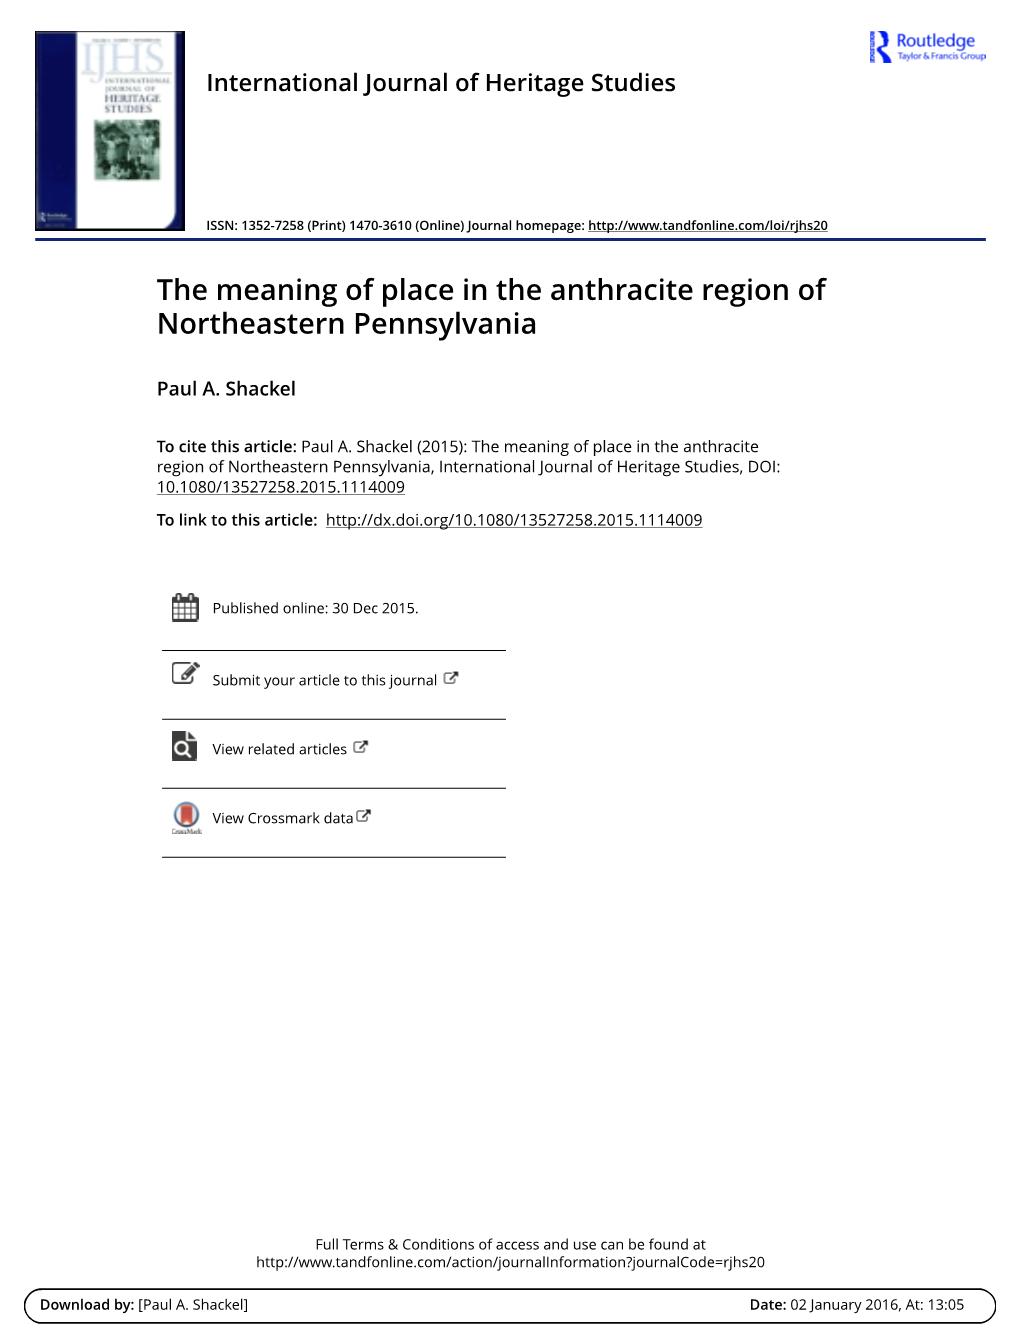 The Meaning of Place in the Anthracite Region of Northeastern Pennsylvania